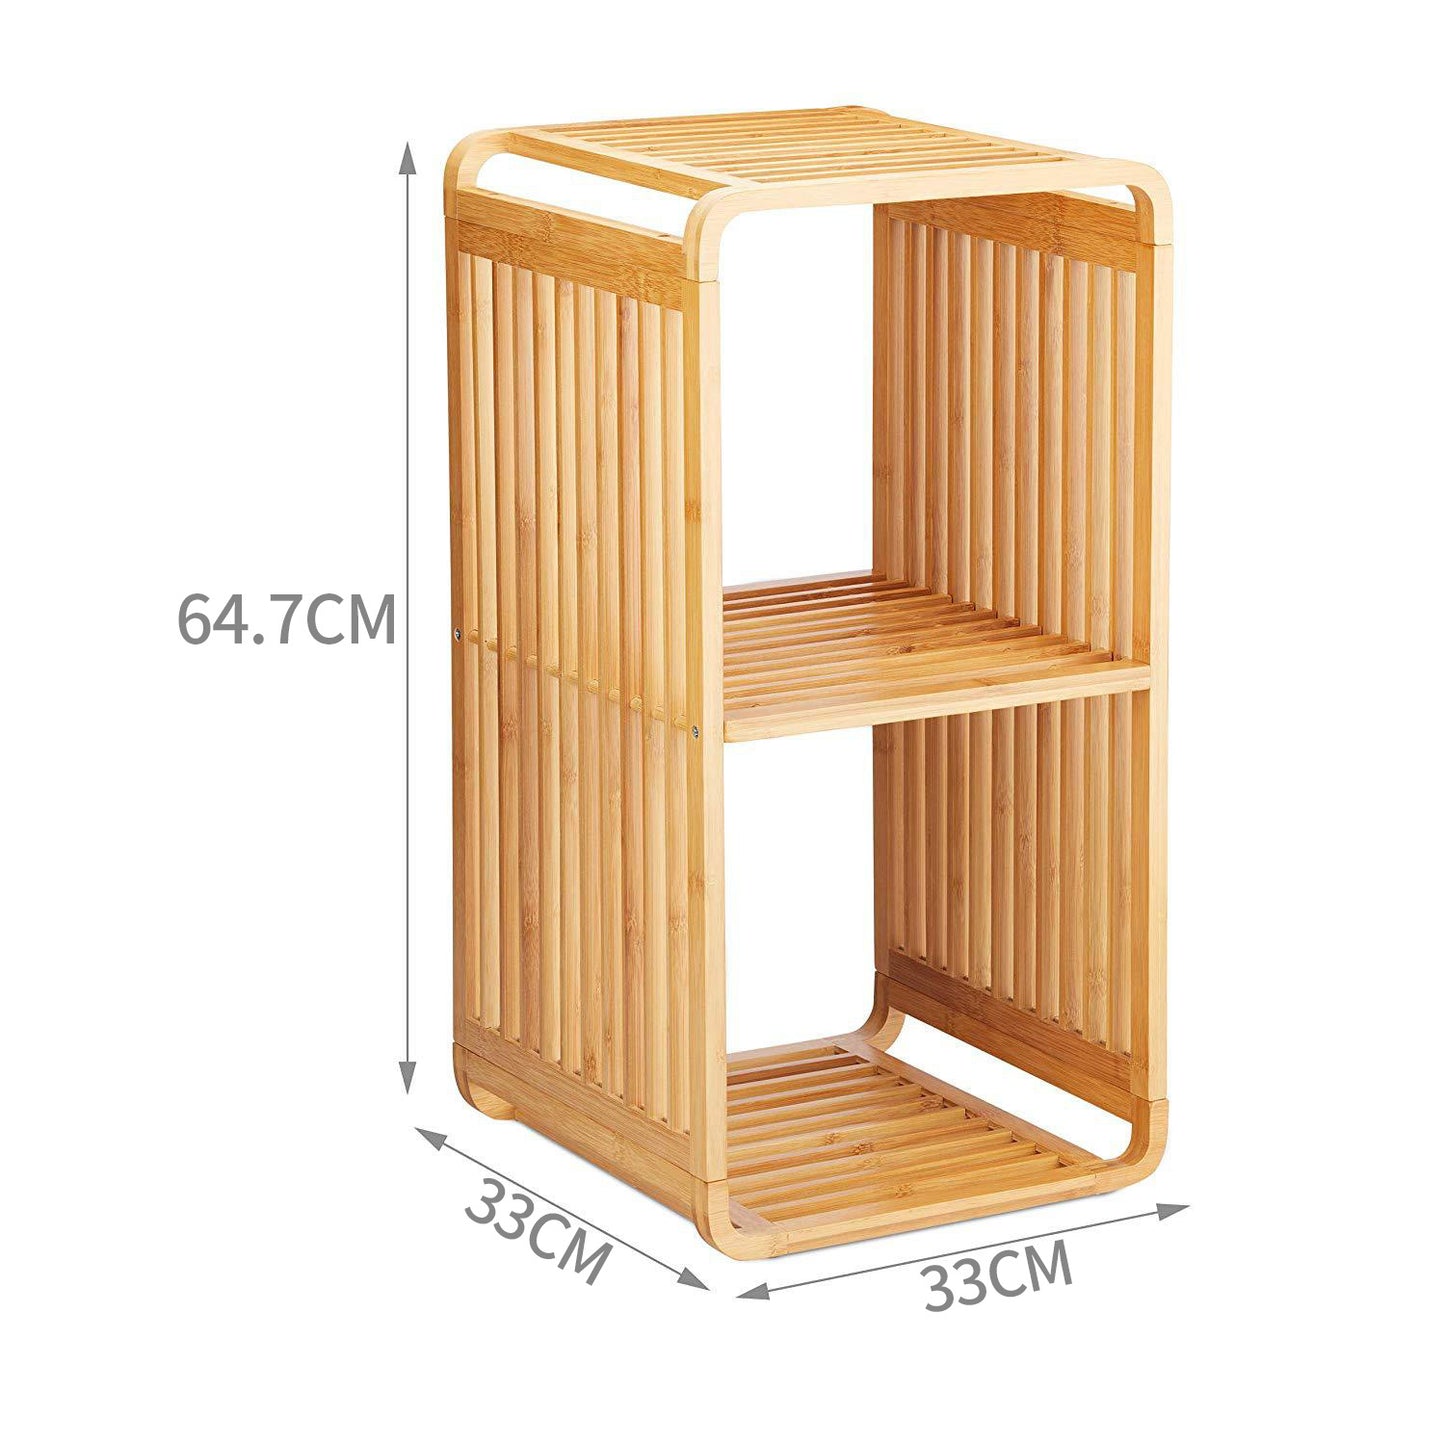 Cube Organizer Multipurpose Shelves Bookcase Indoor Plant Stand Room Decor Home Office Balcony